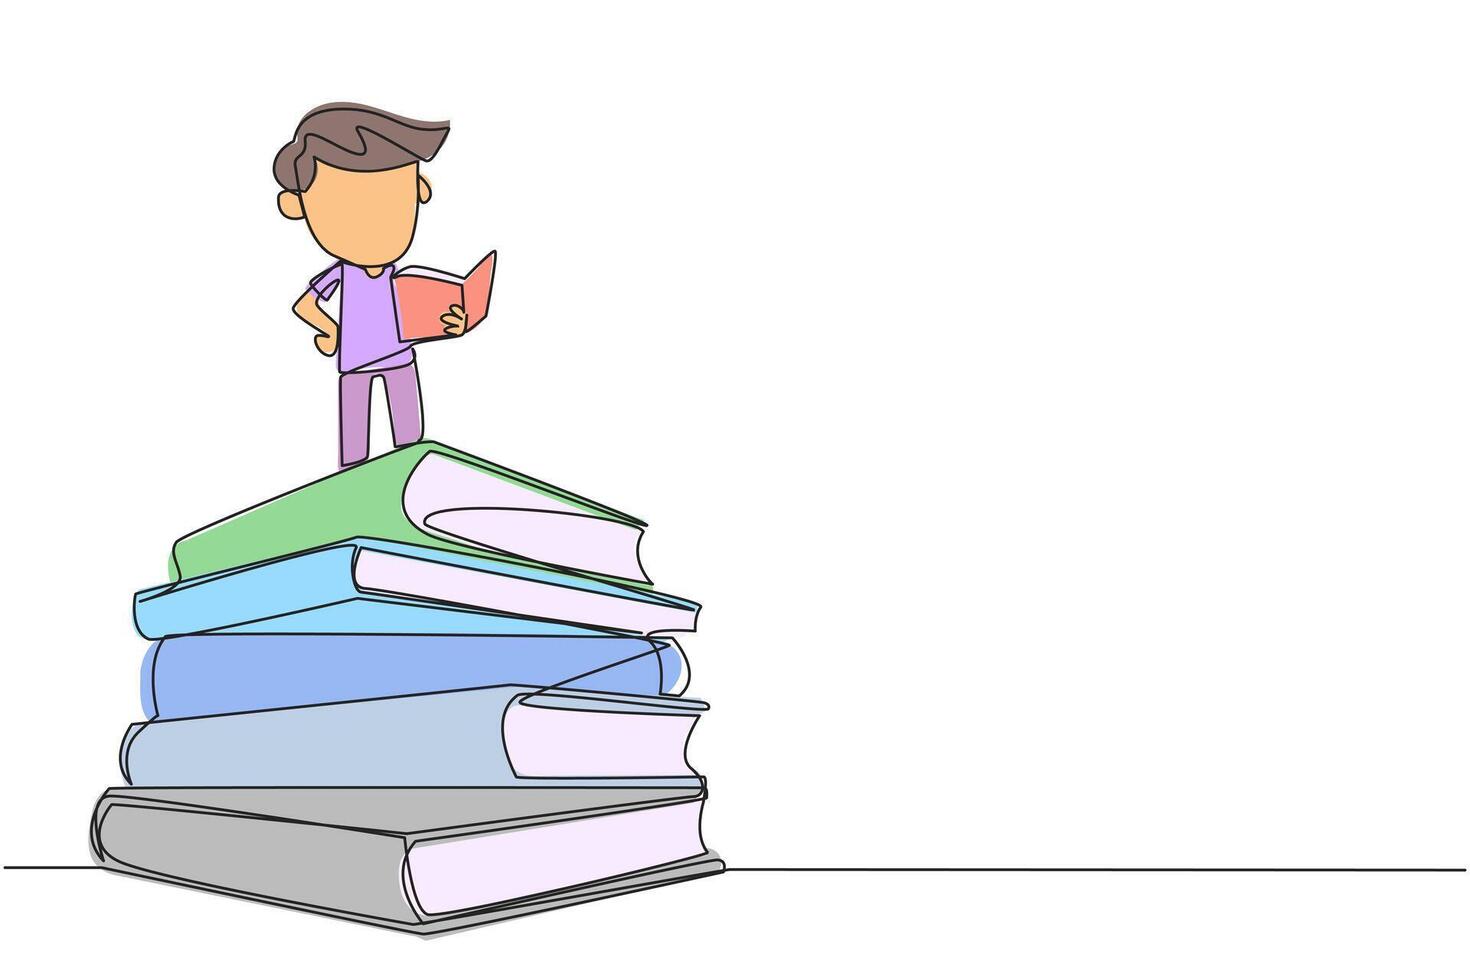 Single one line drawing boy standing on pile of books reading a fiction story book. Intrigued by the book series. Read anywhere to finish reading. Reading. Continuous line design graphic illustration vector